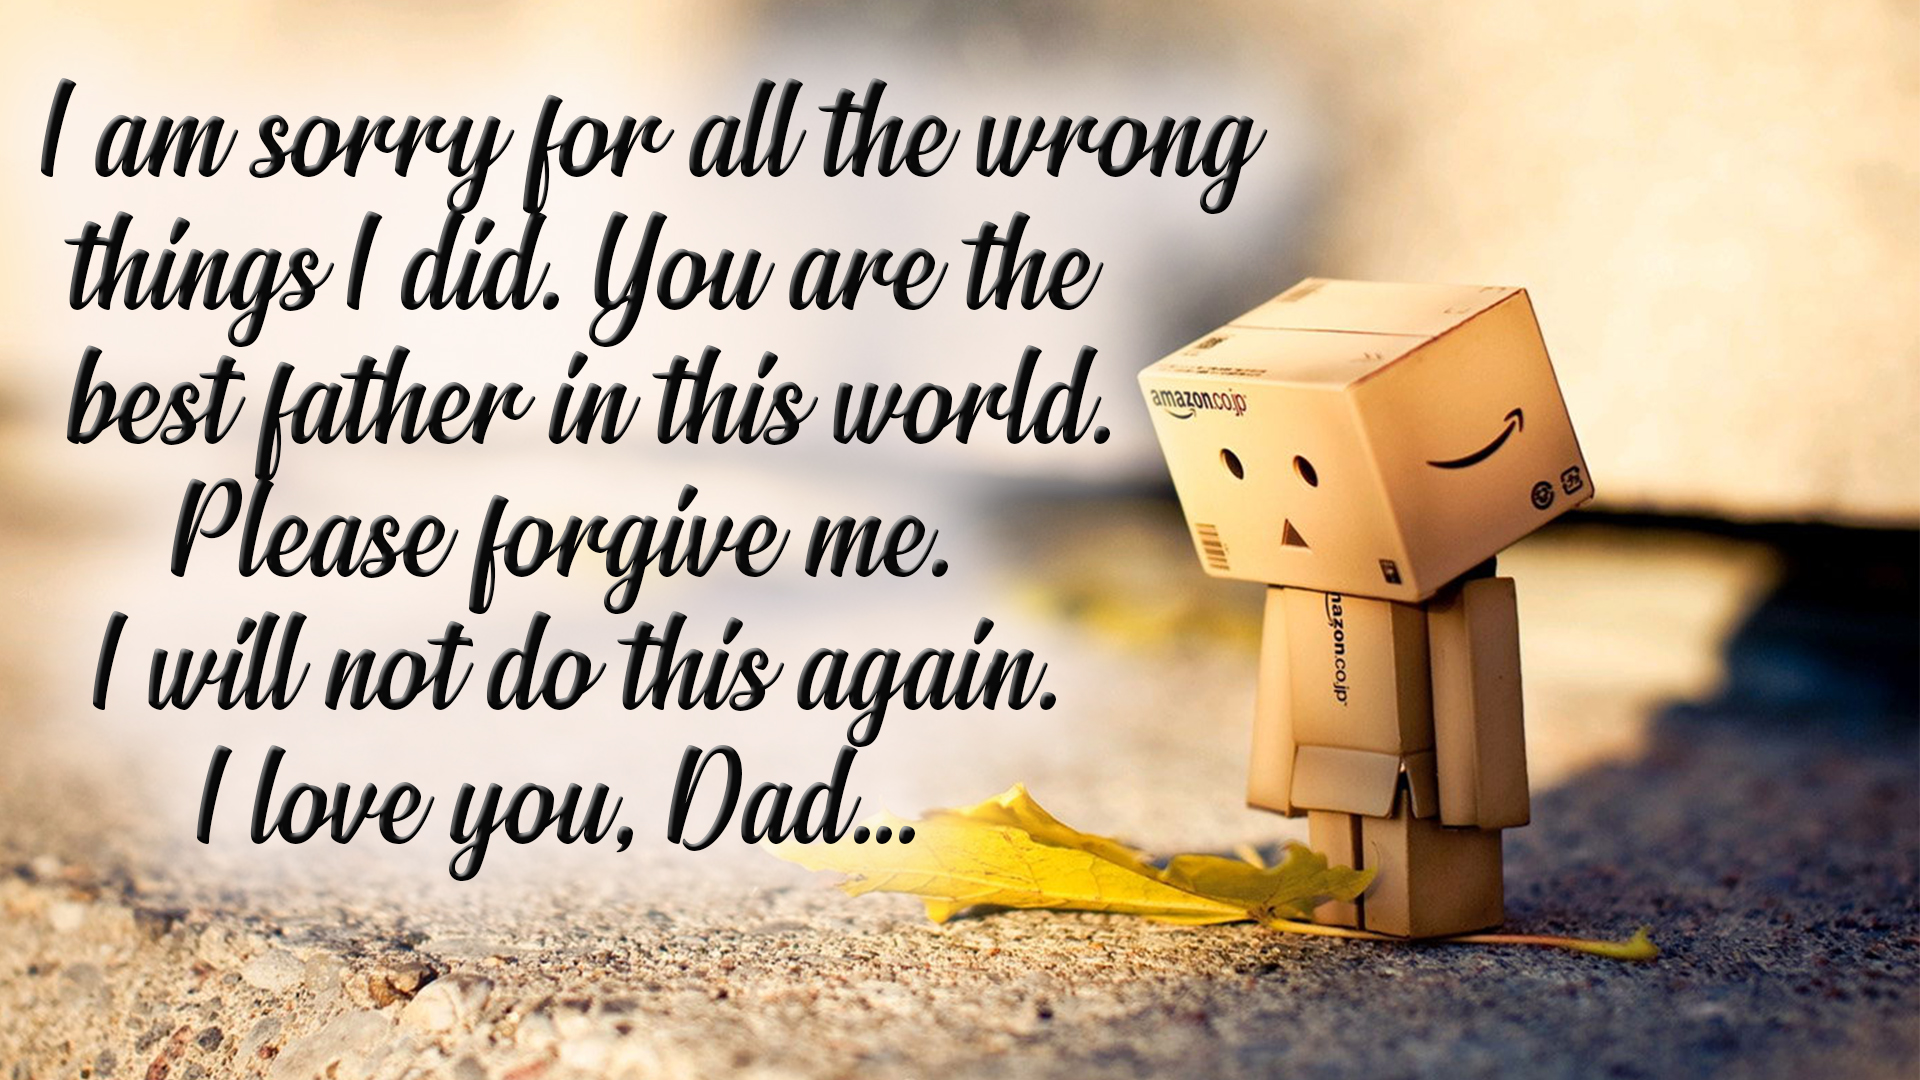 sorry messages for dad image